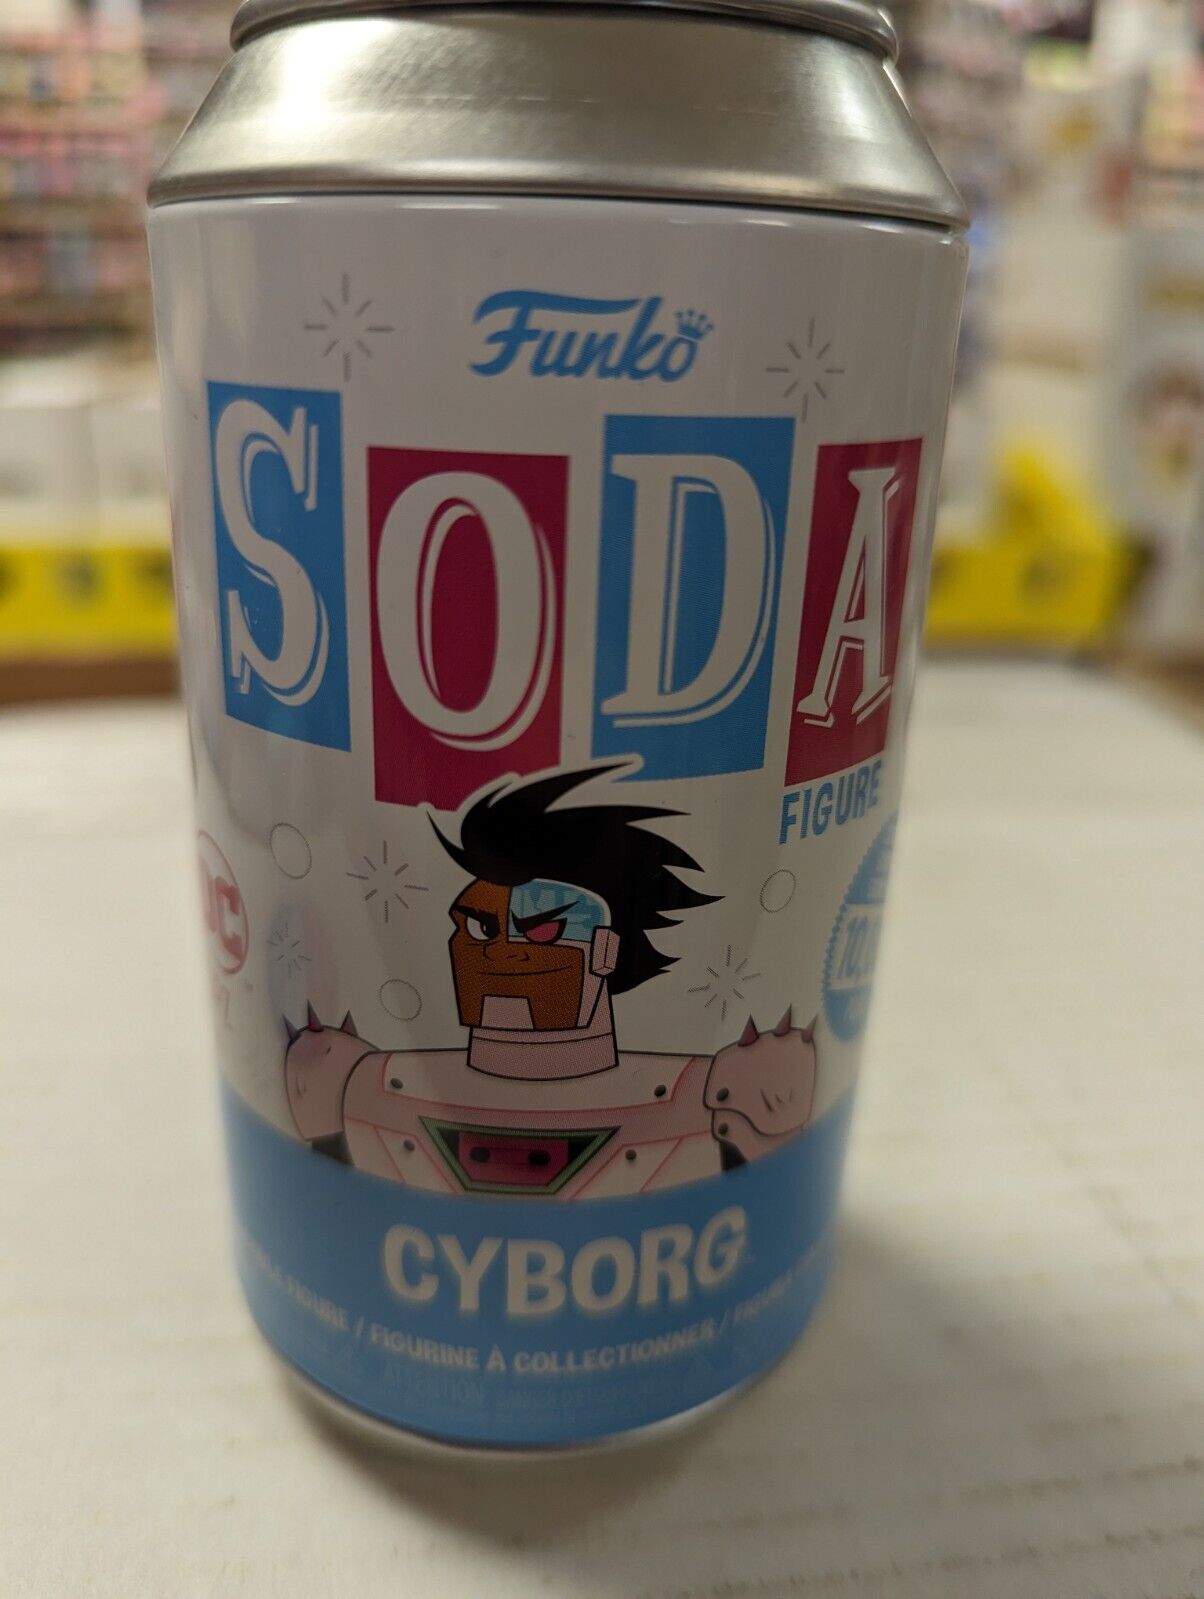 Funko Soda Cyborg With Glowing Pink Axe Chase 1/1600